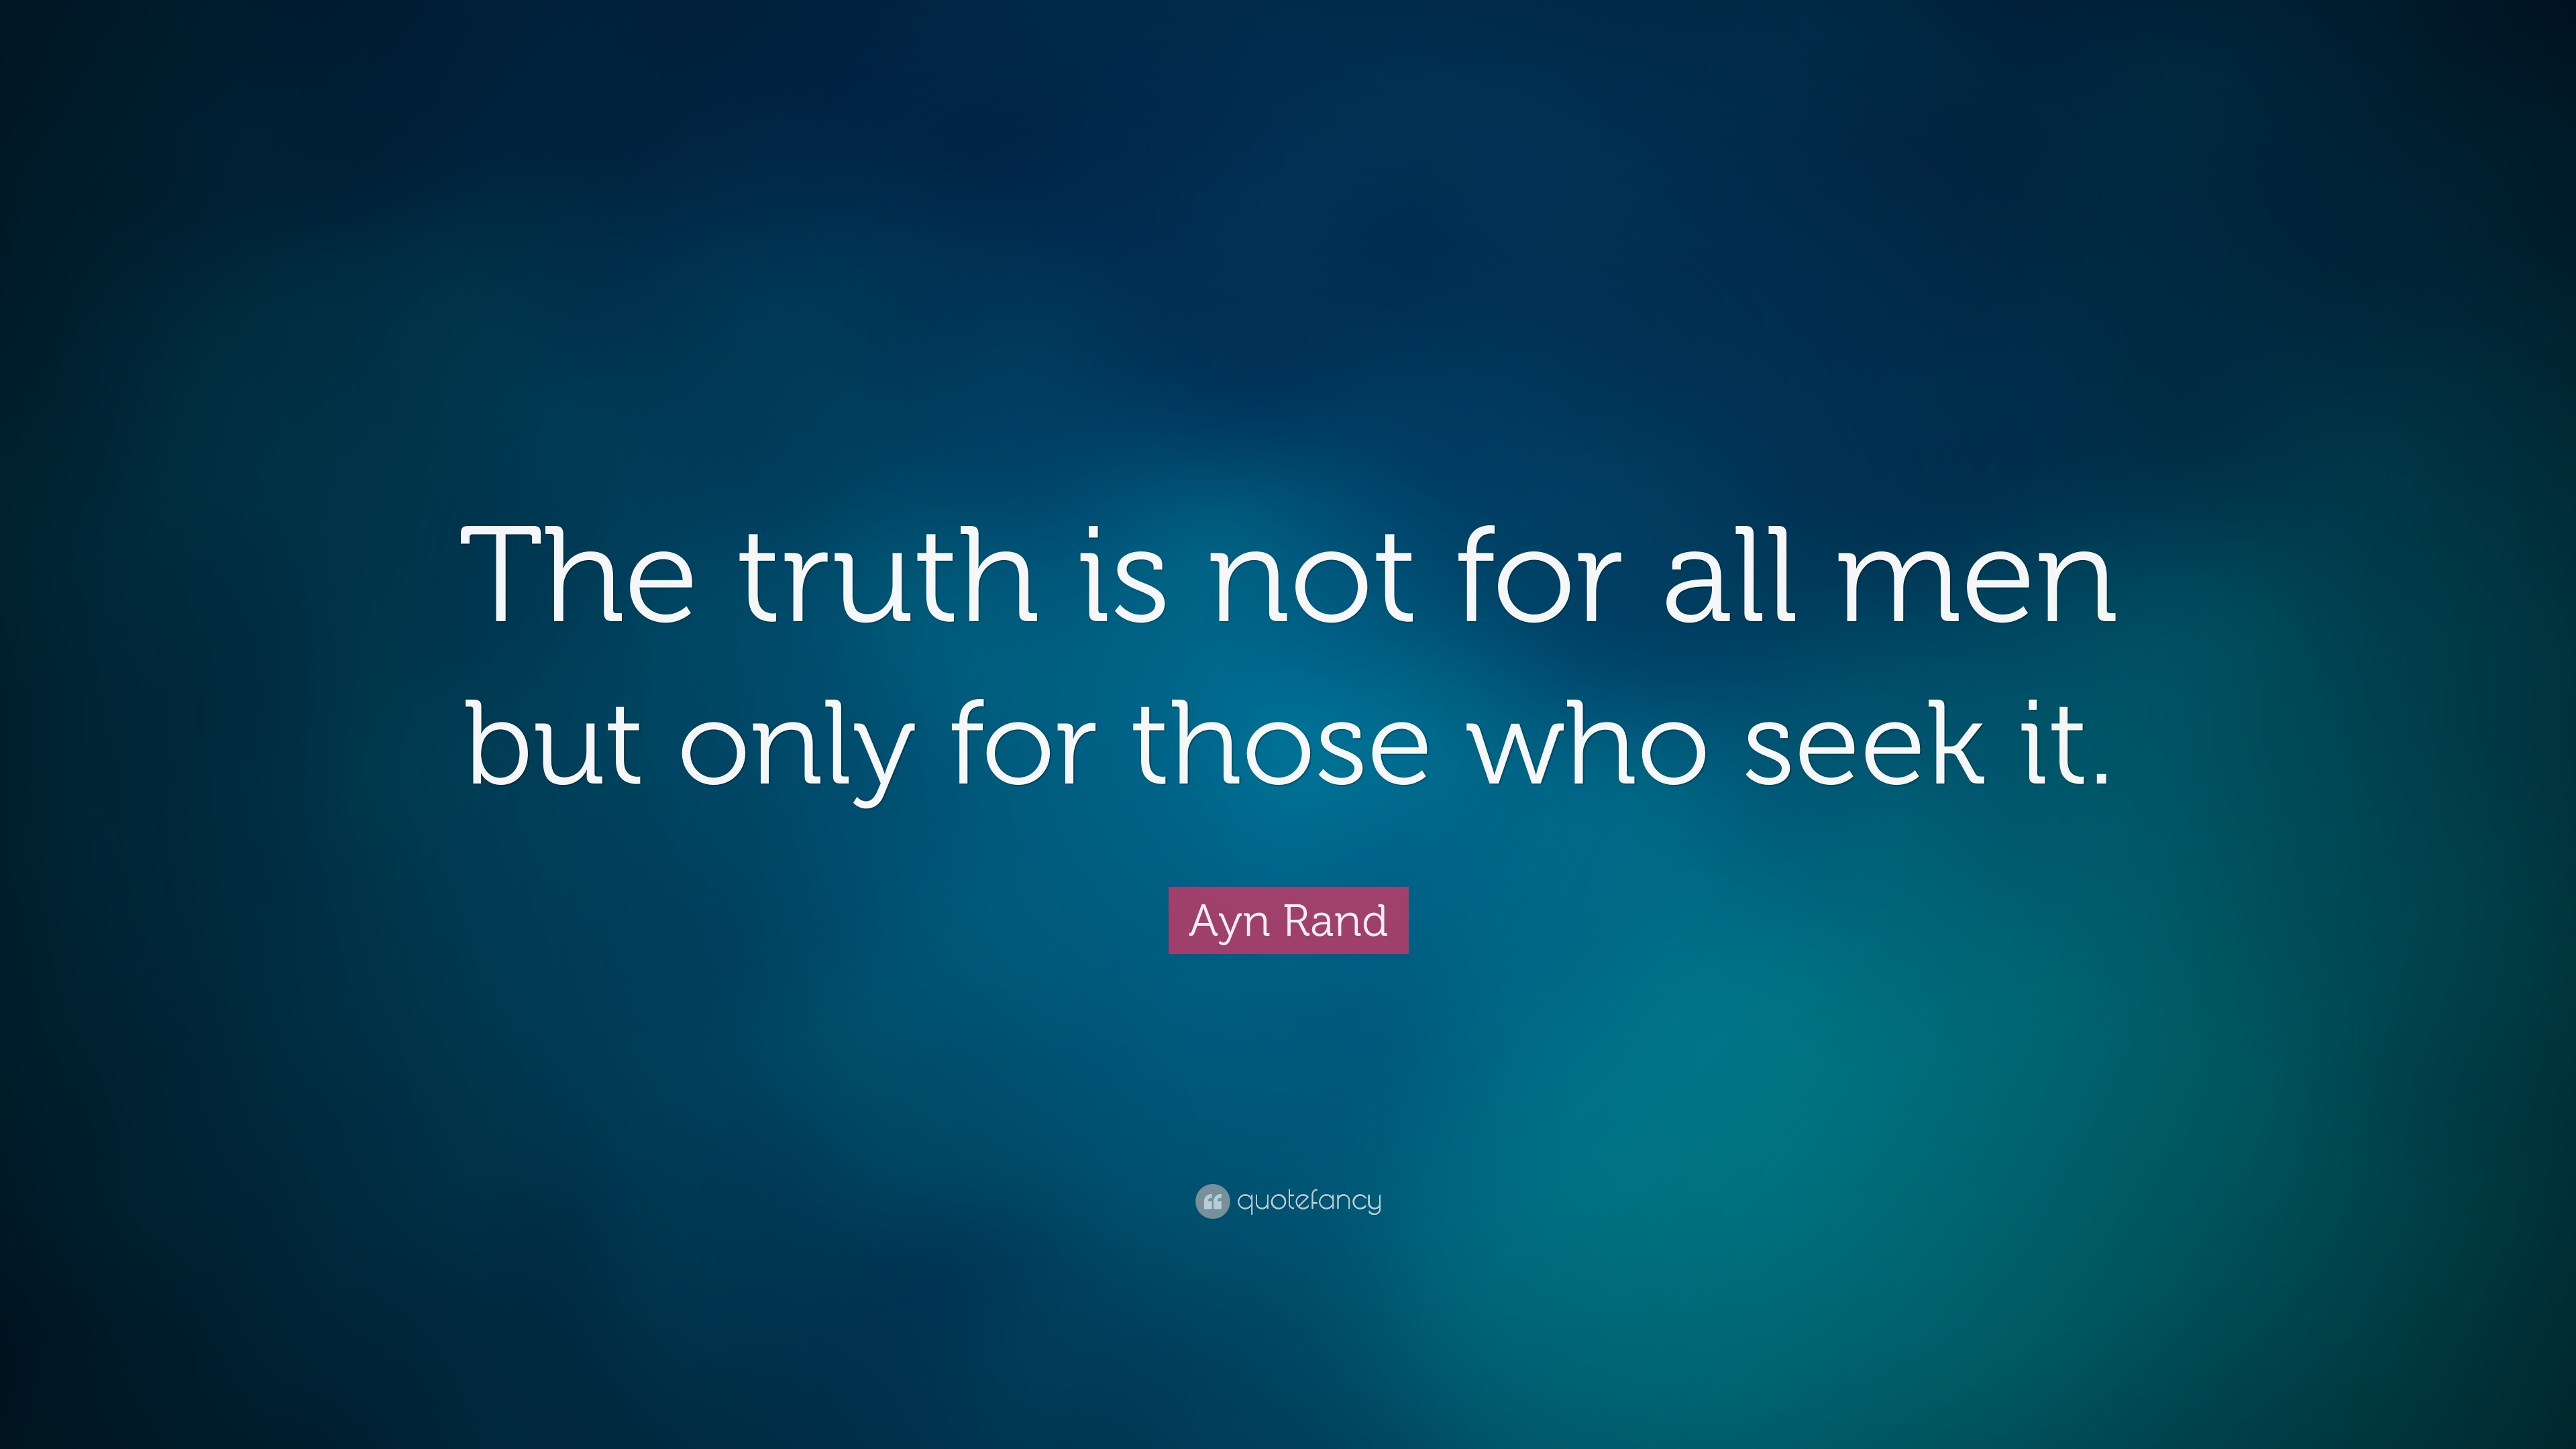 3840x2160 Ayn Rand Quote: “The truth is not for all men but only for those